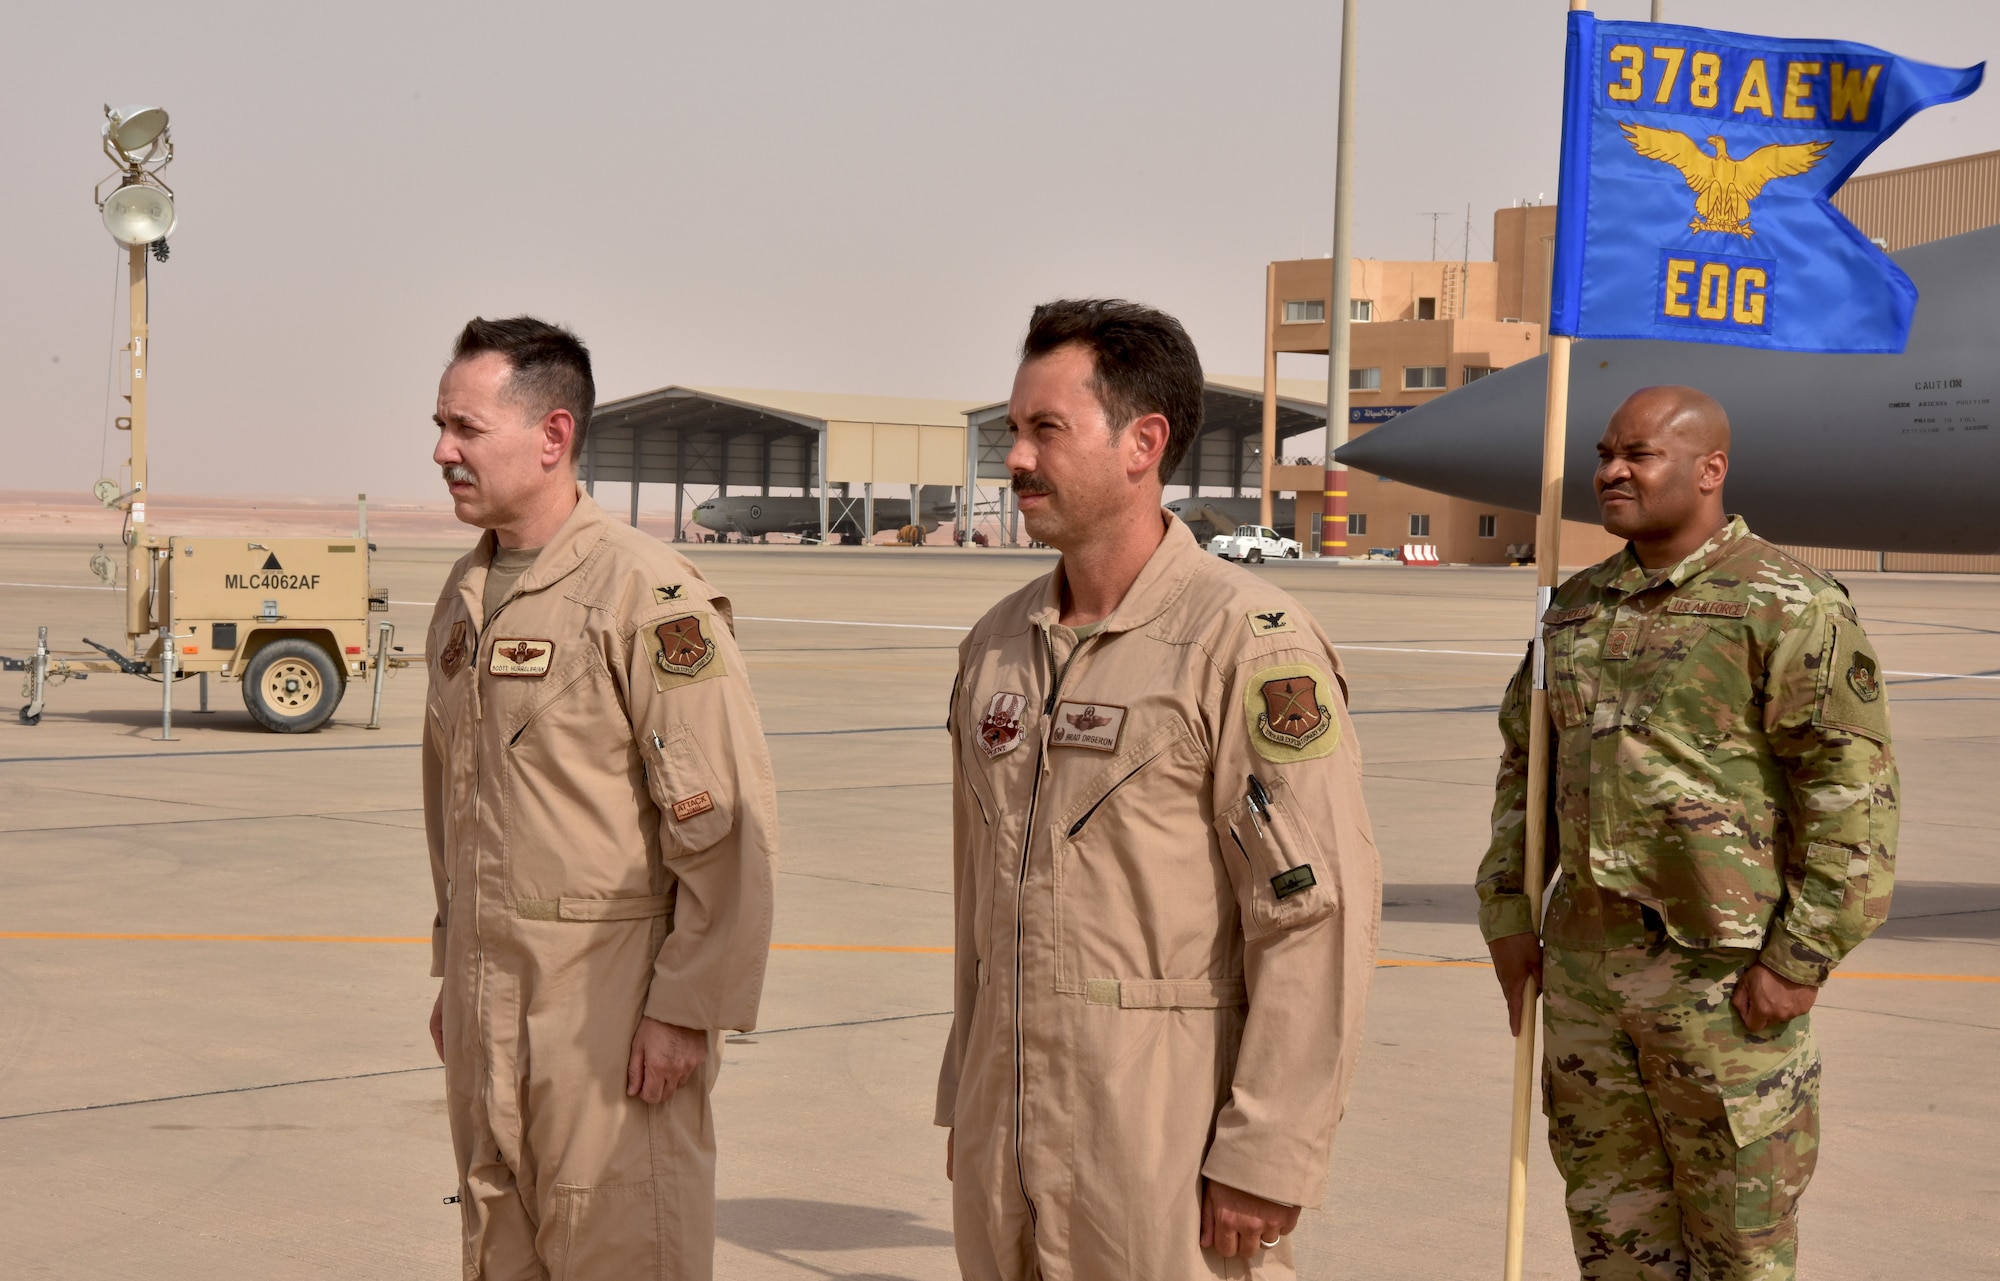 Col. Hurrelbrink, outgoing commander, relinquishes command of the 378th Expeditionary Operations Group to incoming commander, Col. Orgeron during the 378th EOG Change of Command Ceremony at Prince Sultan Air Base, Kingdom of Saudi Arabia.